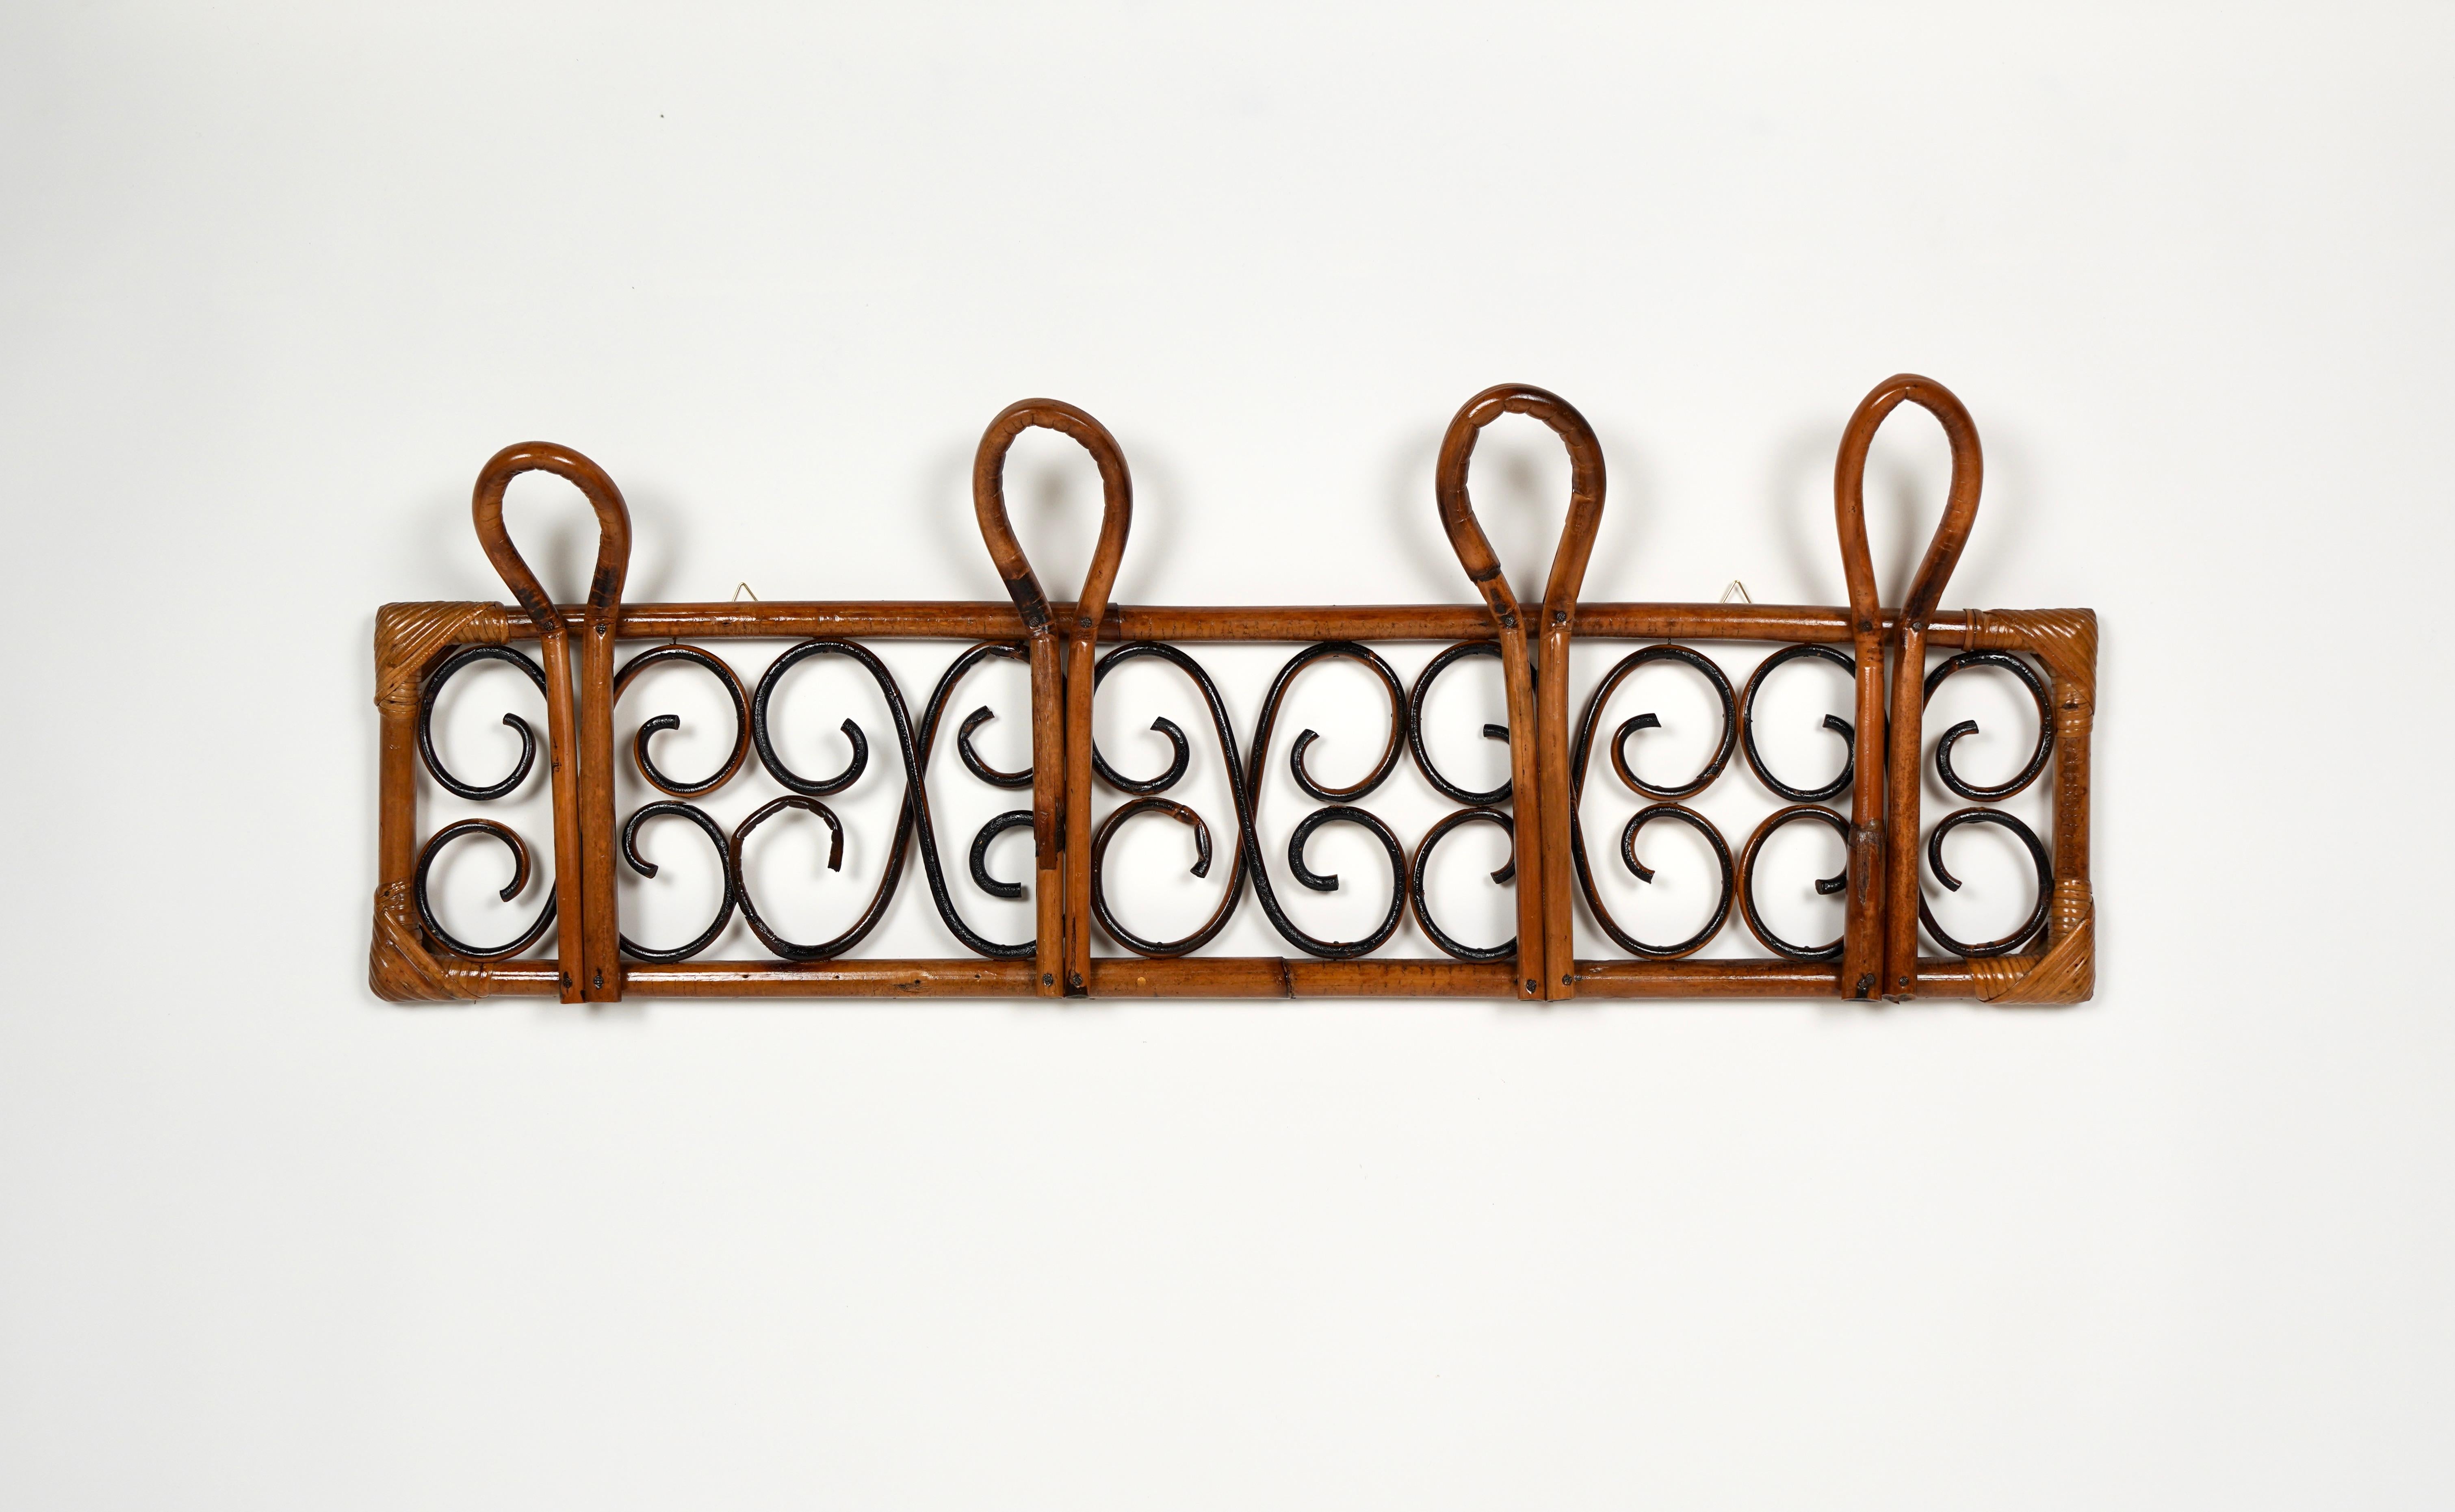 Midcentury coat rack stand in bamboo and rattan with four hooks. 

Made in Italy in the 1960s. 

The rattan material provides an easygoing chic, which flatters any interior.

Bamboo / rattan has been polished by a professional restorer.